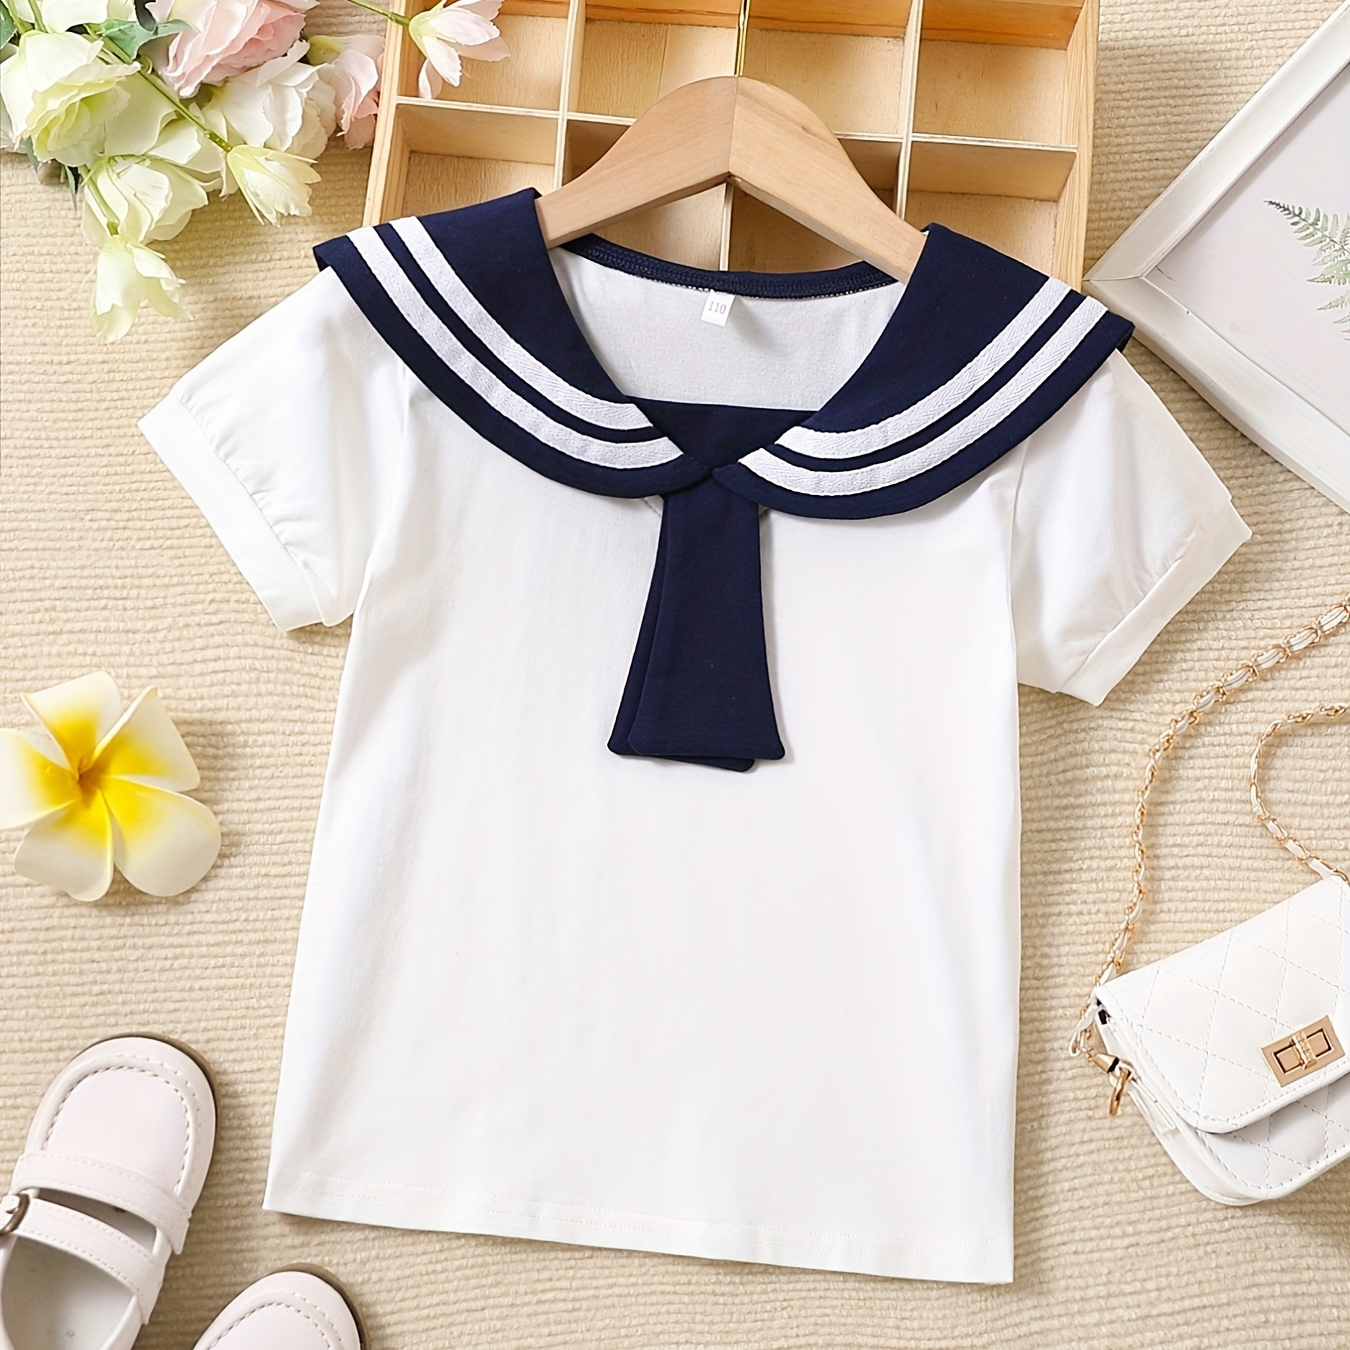 Girls Casual Trendy Cute Preppy Style Short Sleeve Top Sailor Collar  T-shirt For Summer Holiday Party Kids Clothes